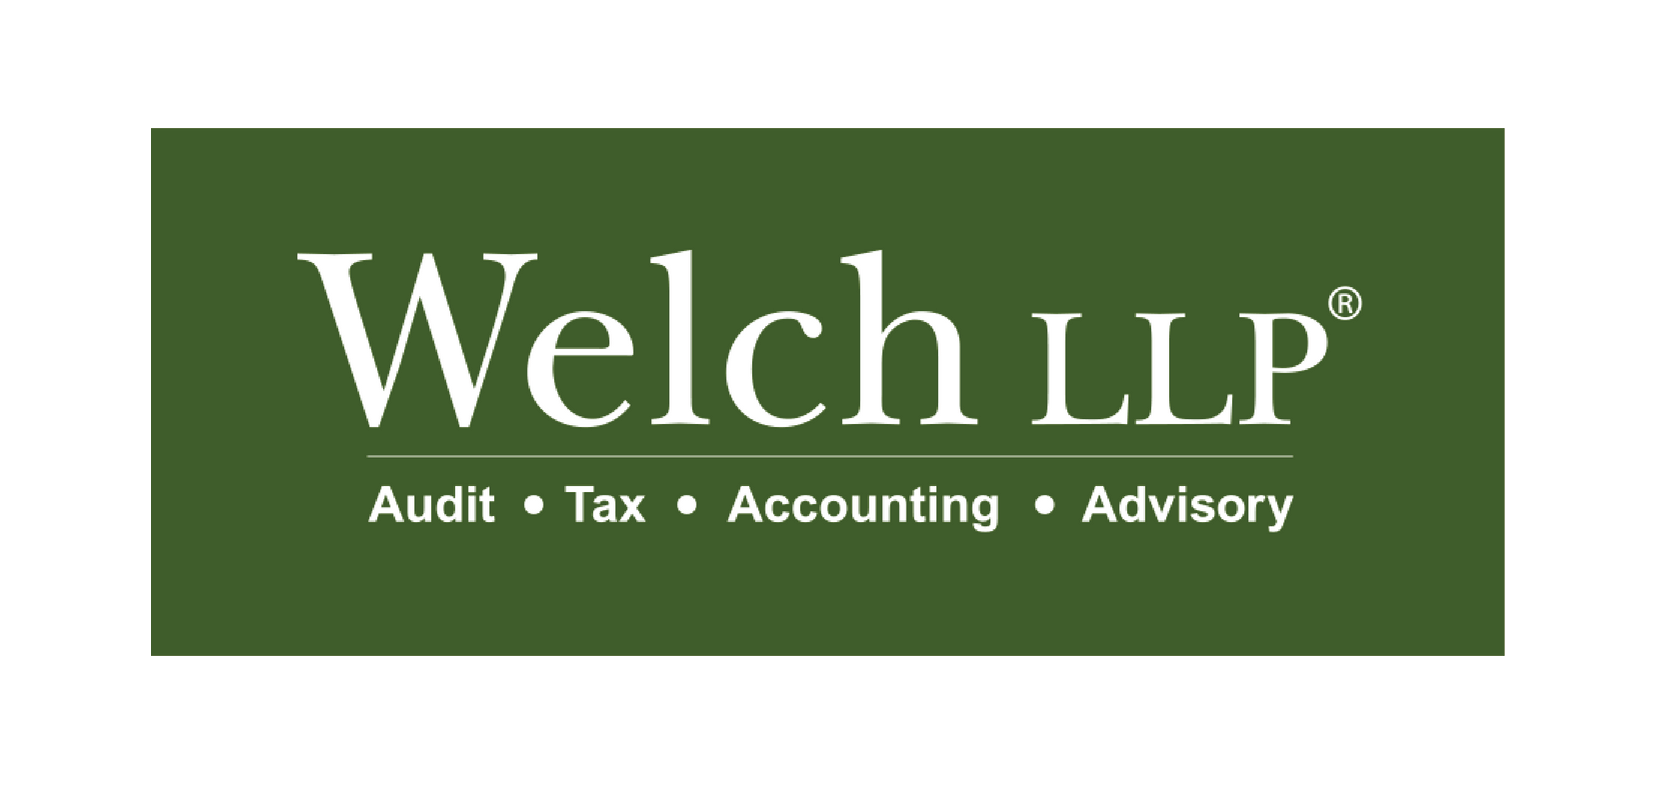 Go to Welch LLP Gold website